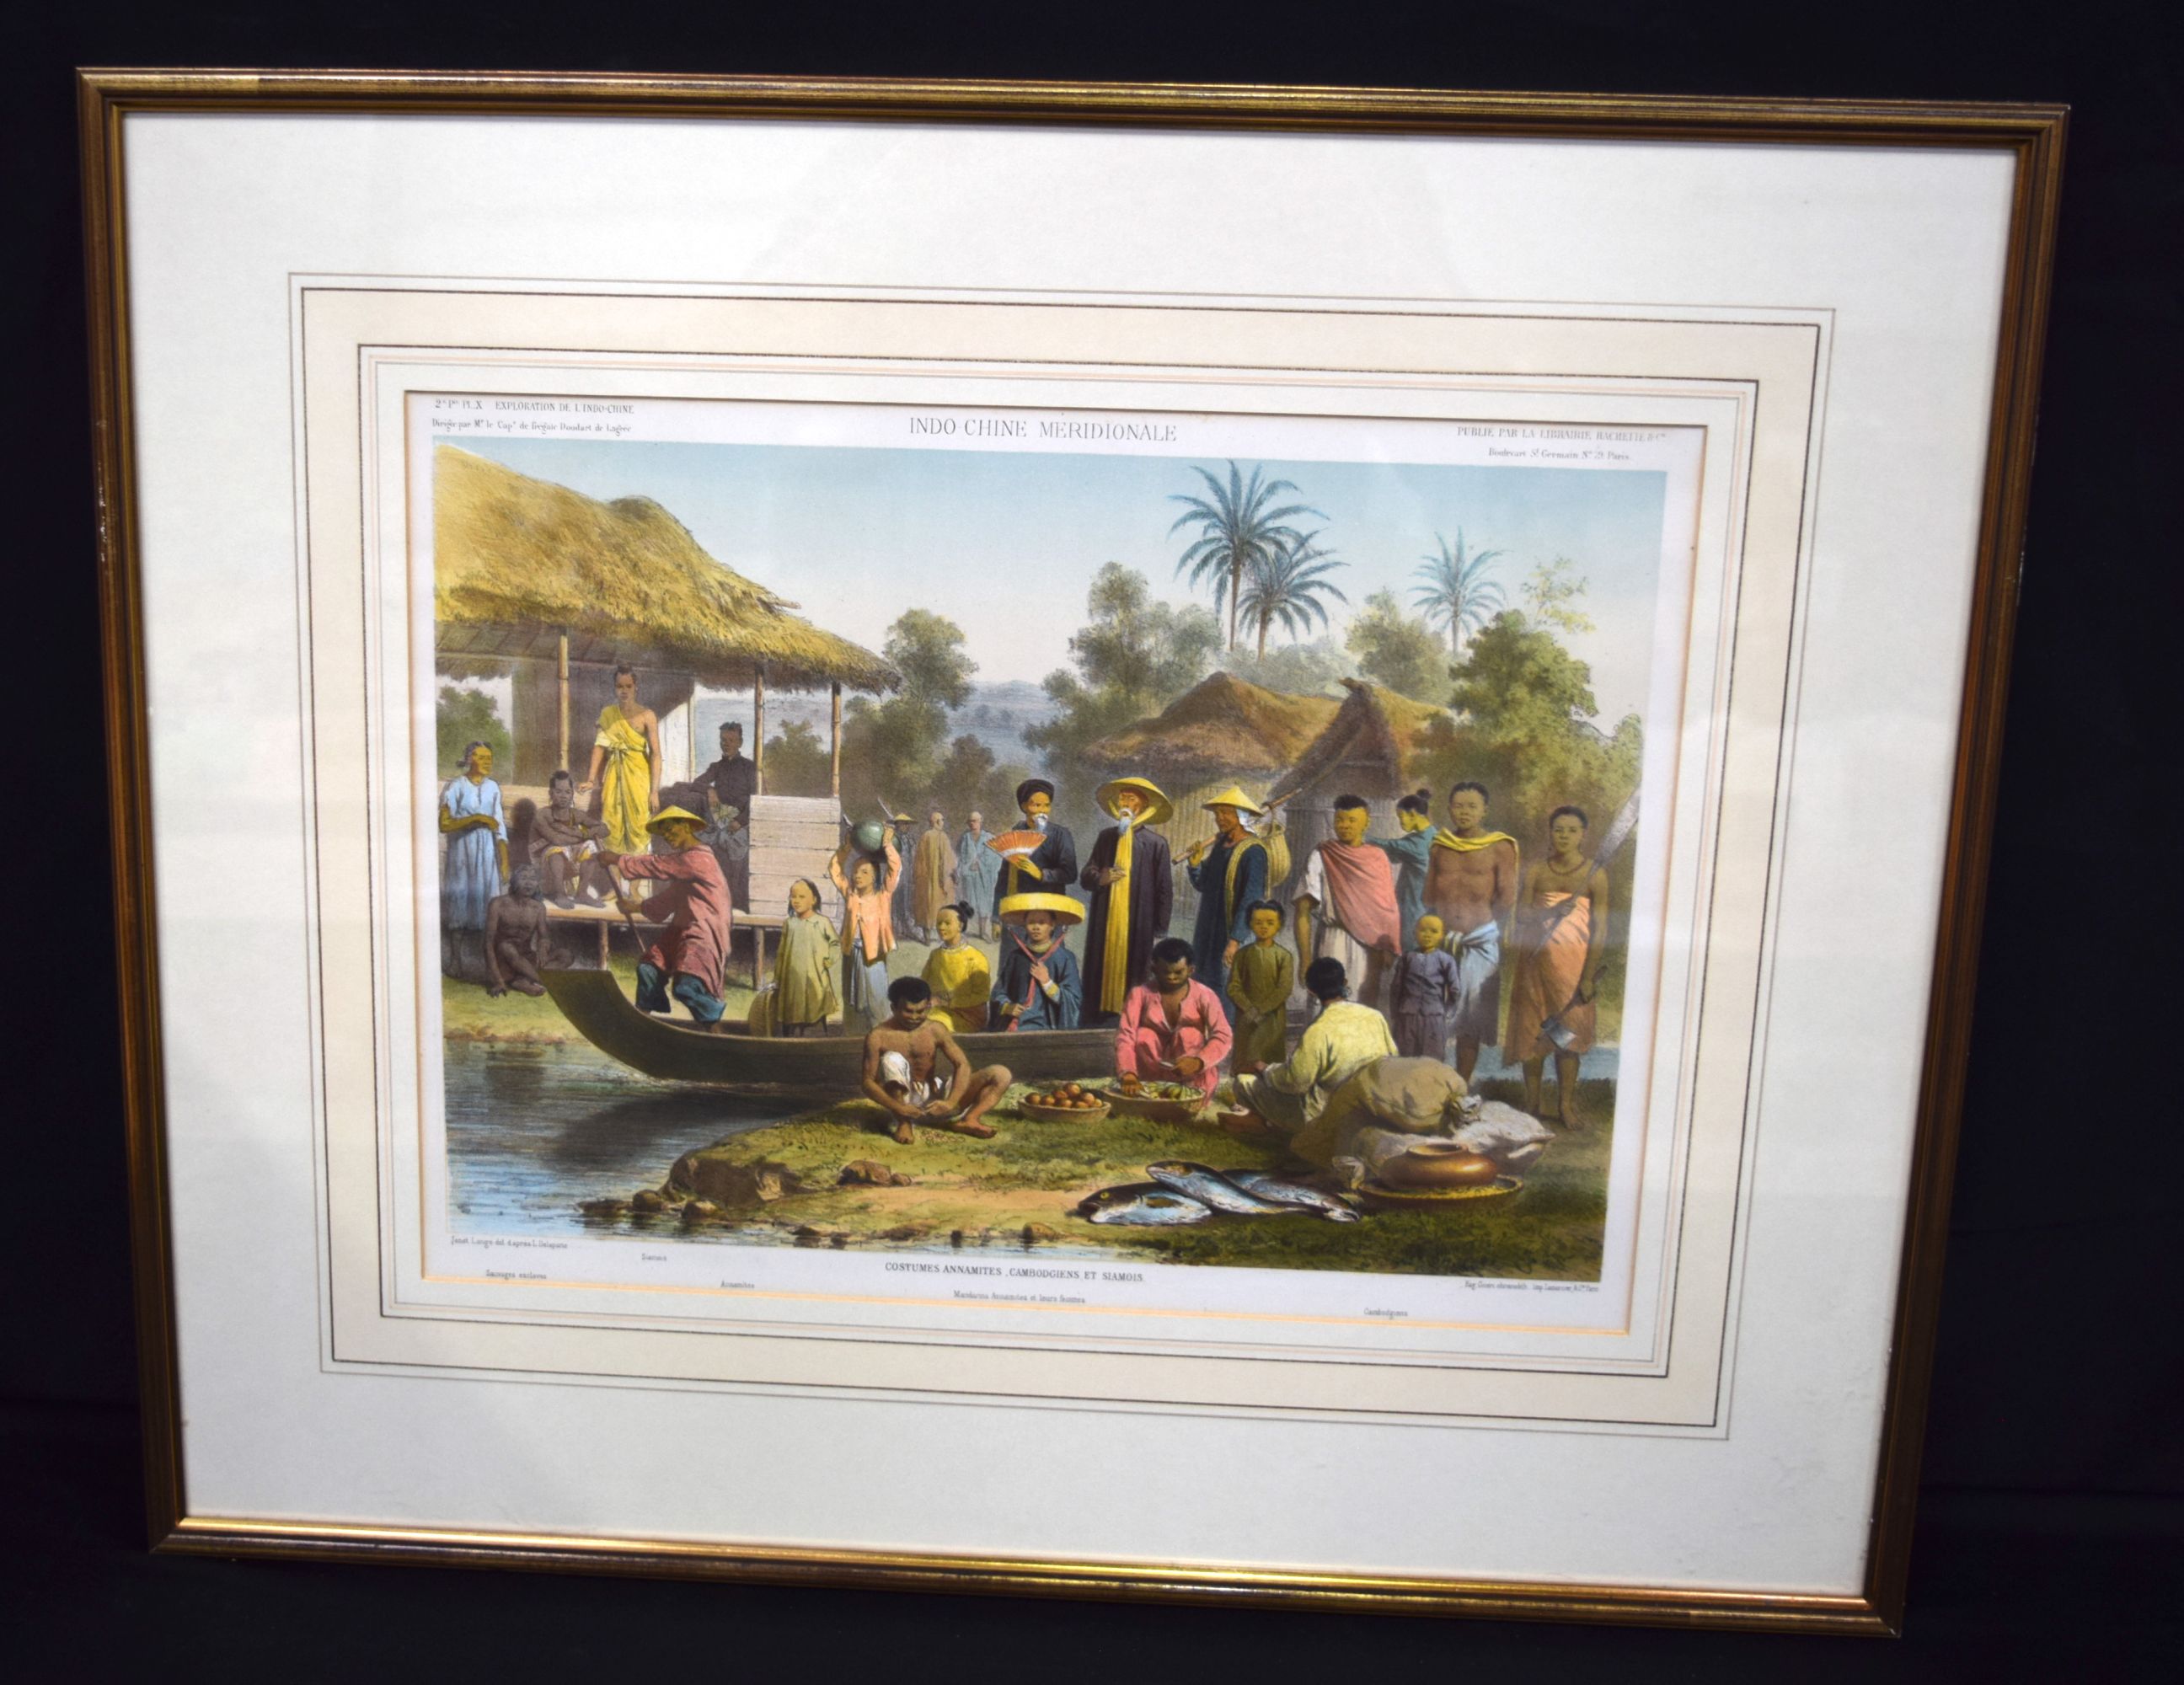 A framed antique lithographic print by L Delaporte of a South East Asian scene 31 x 43cm.